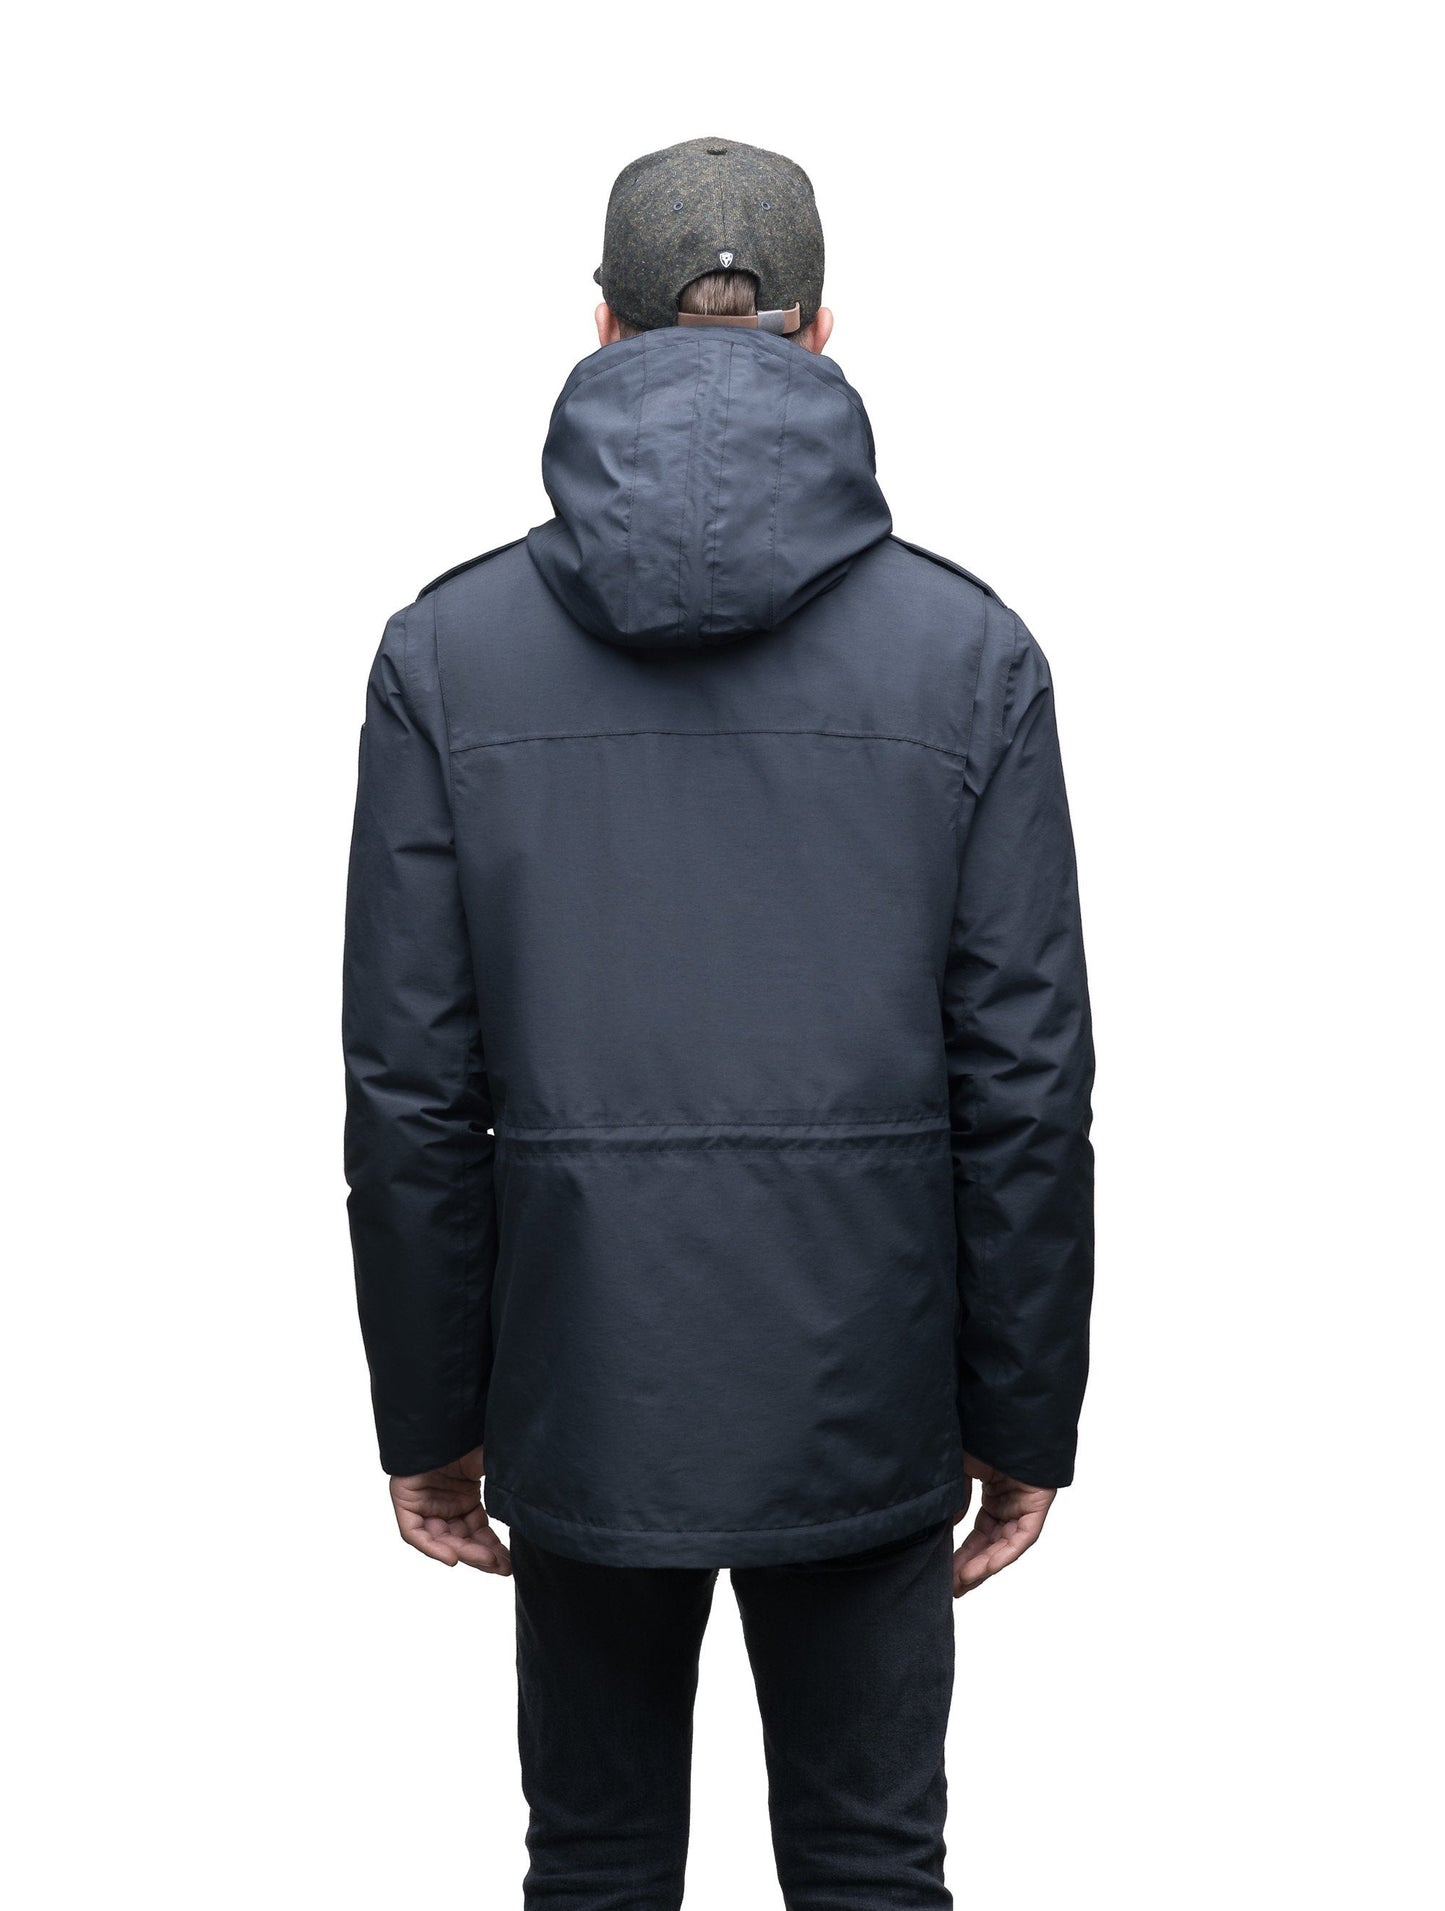 Men's hip length 3 in 1 jacket with removable hood in Cy Black